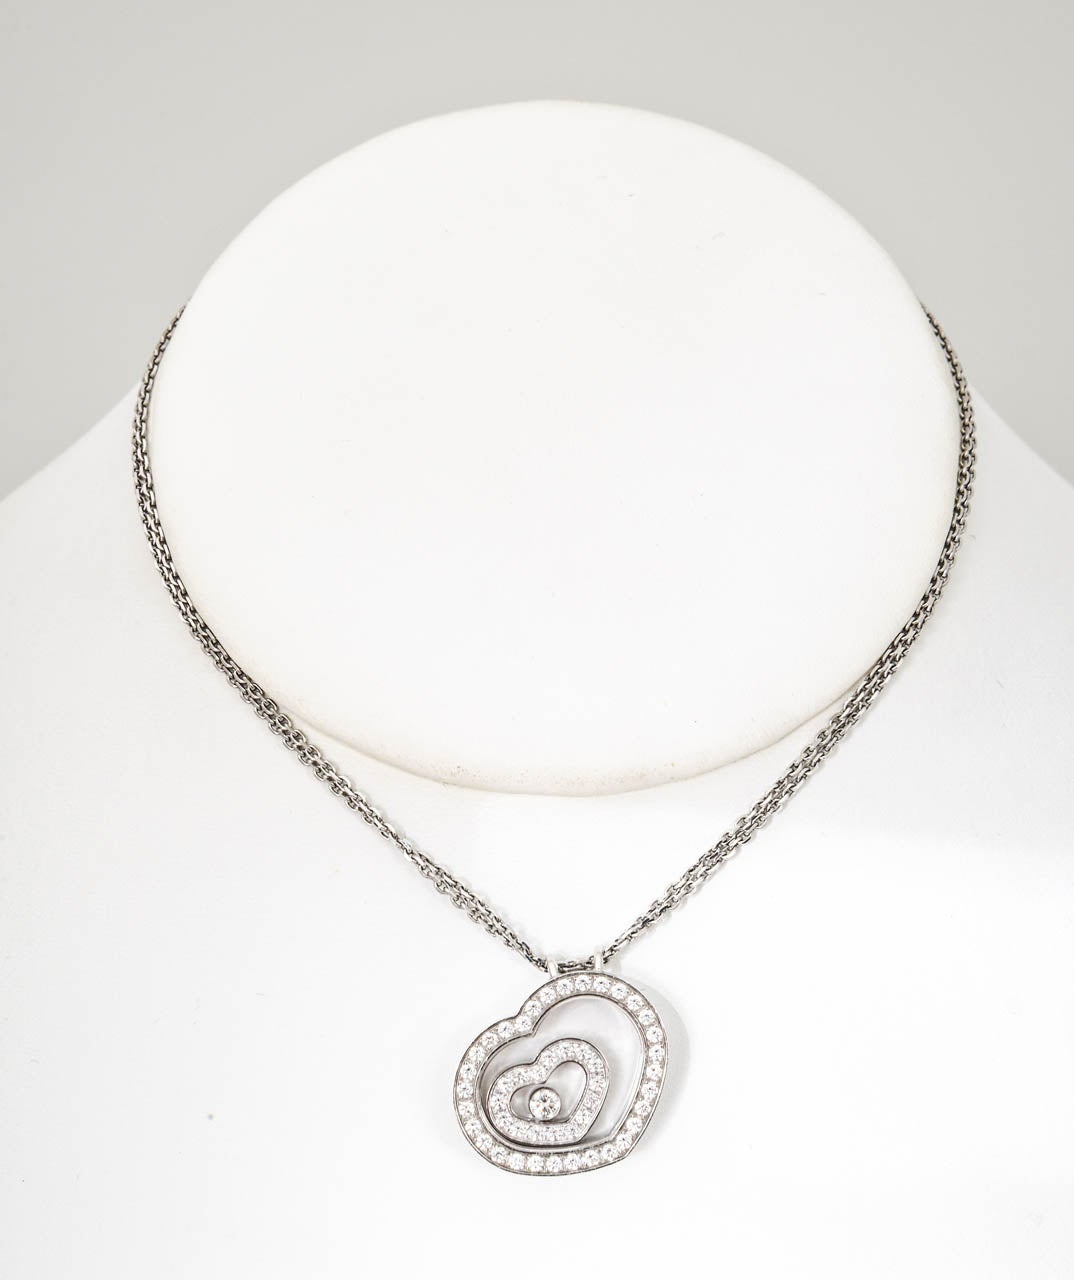 Wonderful classic Chopard piece with signature on necklace and pendant.

Retail was approximately $9,500.  It is no longer available on the Chopard web site.

47 Diamonds = 0.47ct
1 Floating Diamond = 0.10ct
18kt Double Strand Oval Link Chain,